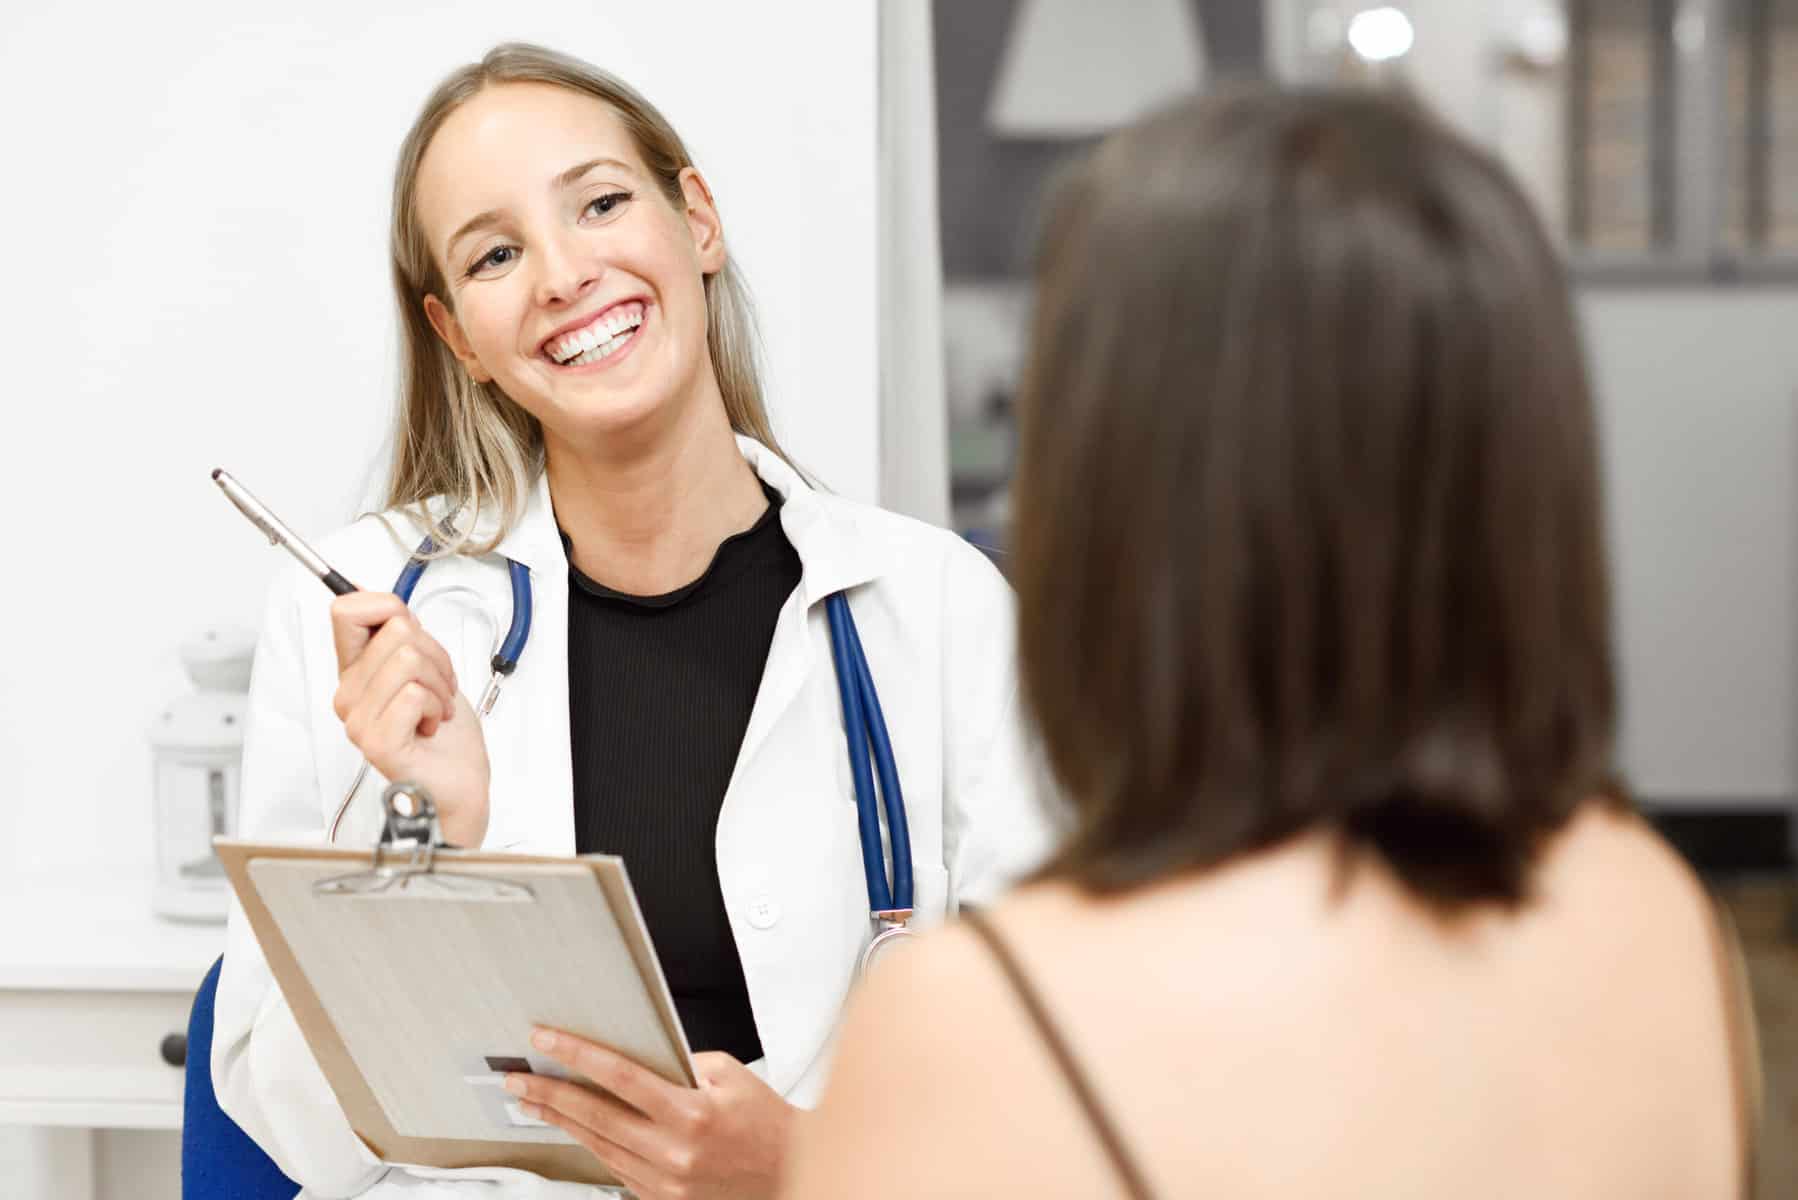 How to choose a concierge doctor